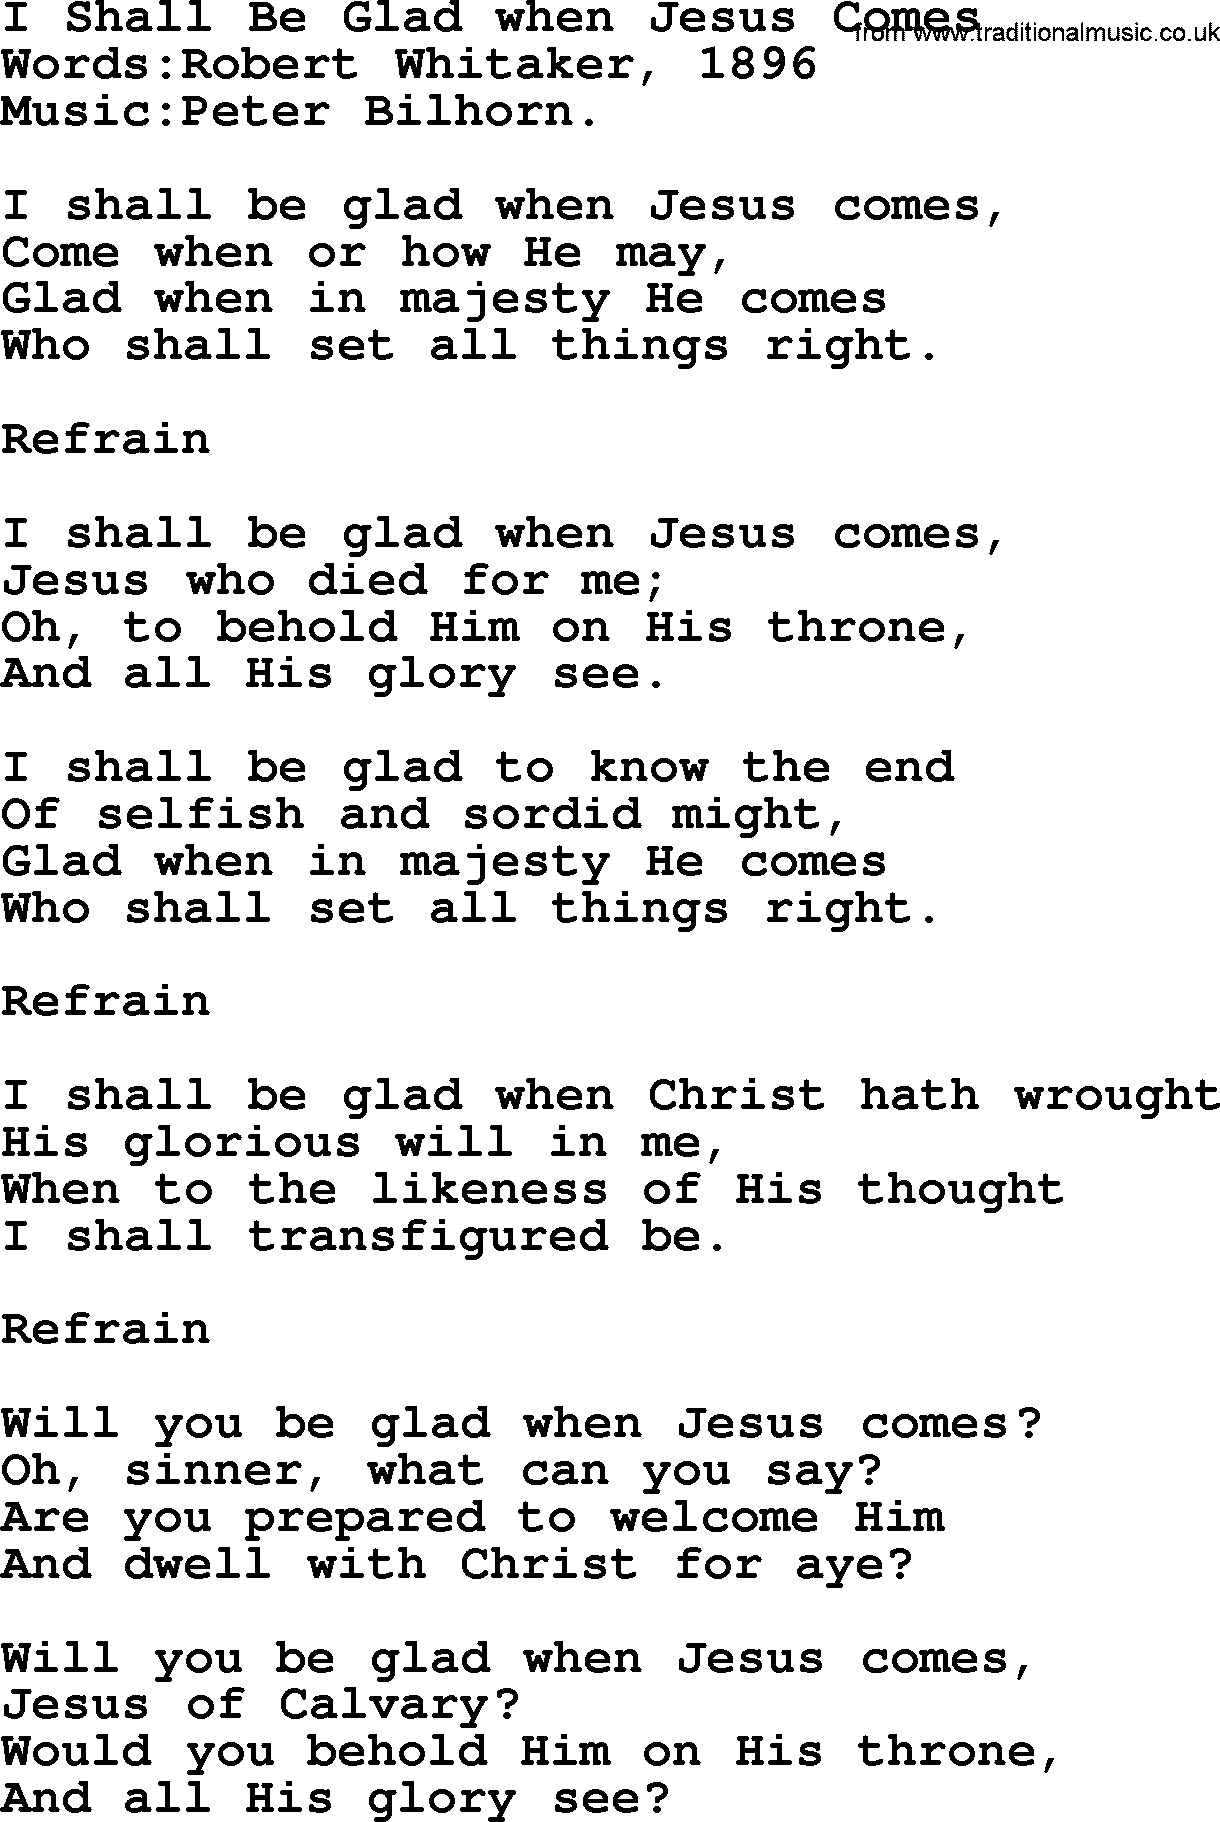 Christian hymns and songs about Jesus' Return(The Second Coming): I Shall Be Glad When Jesus Comes, lyrics with PDF